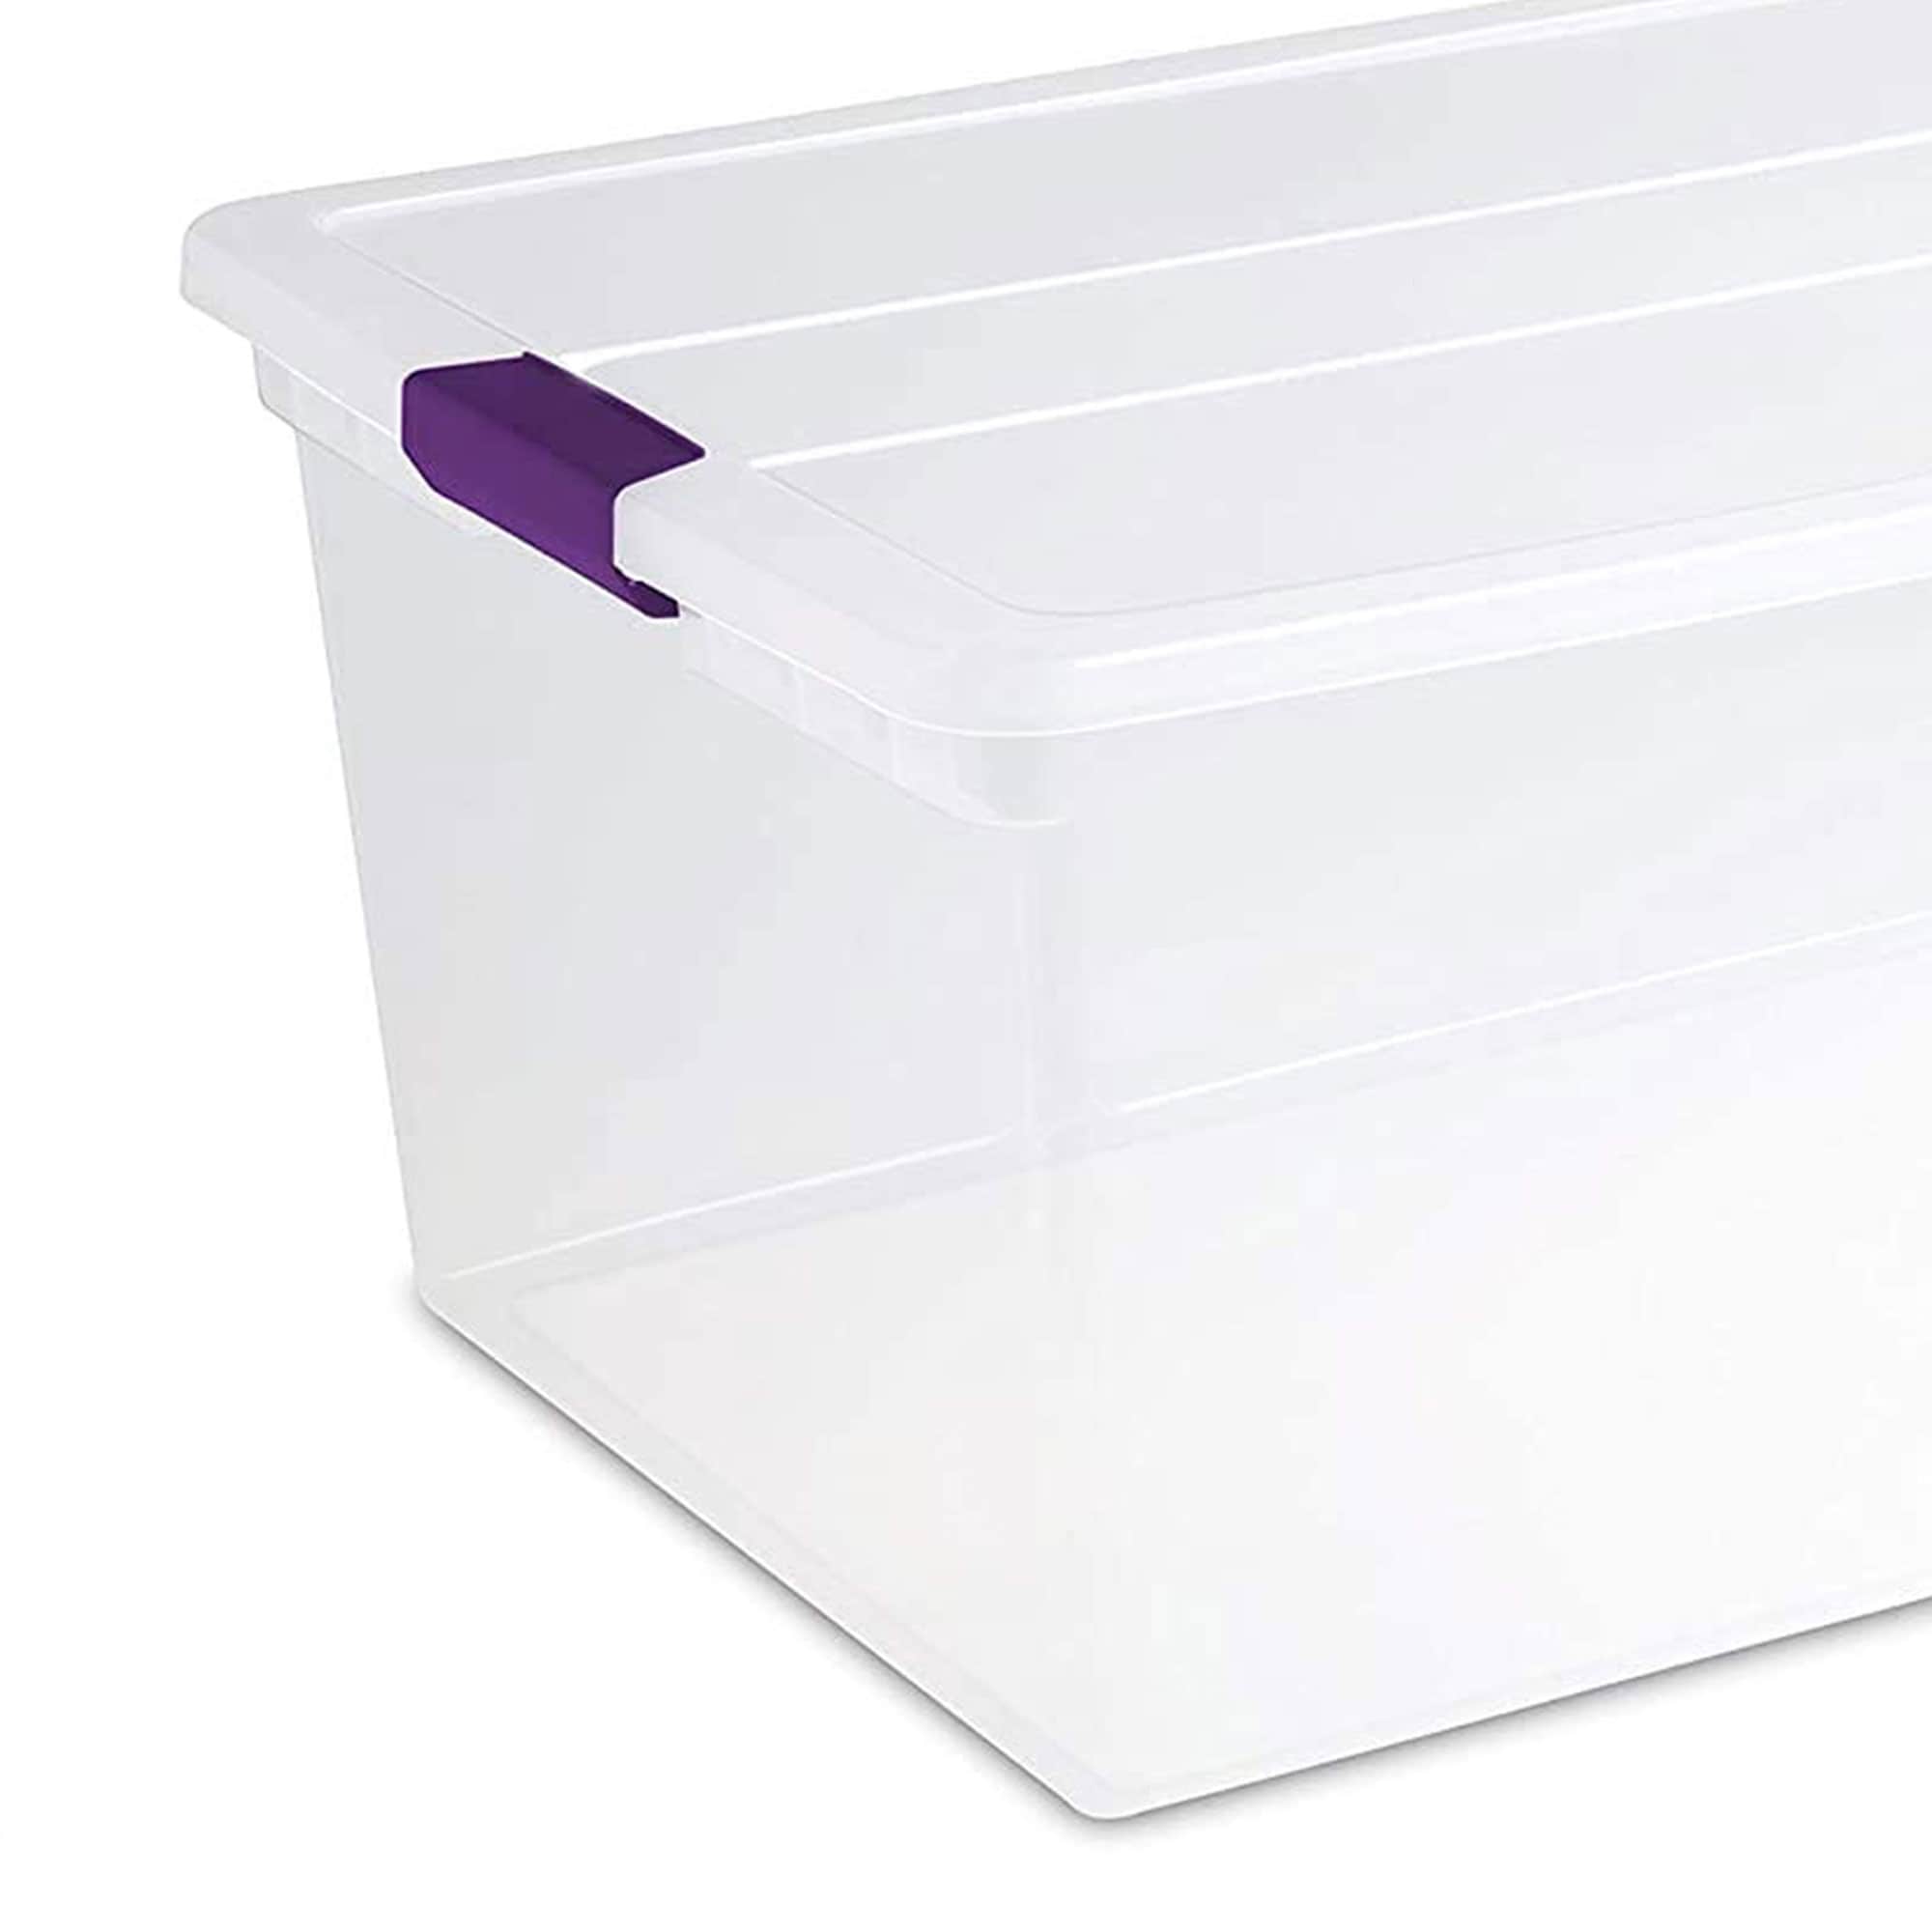 https://ak1.ostkcdn.com/images/products/is/images/direct/f074b929b28ba83dd6327af73fe8fc71f28c11cf/Sterilite-110-Qt-Clear-Storage-Organization-Box-w--Secure-Latching-Lid-%2816-Pack%29.jpg